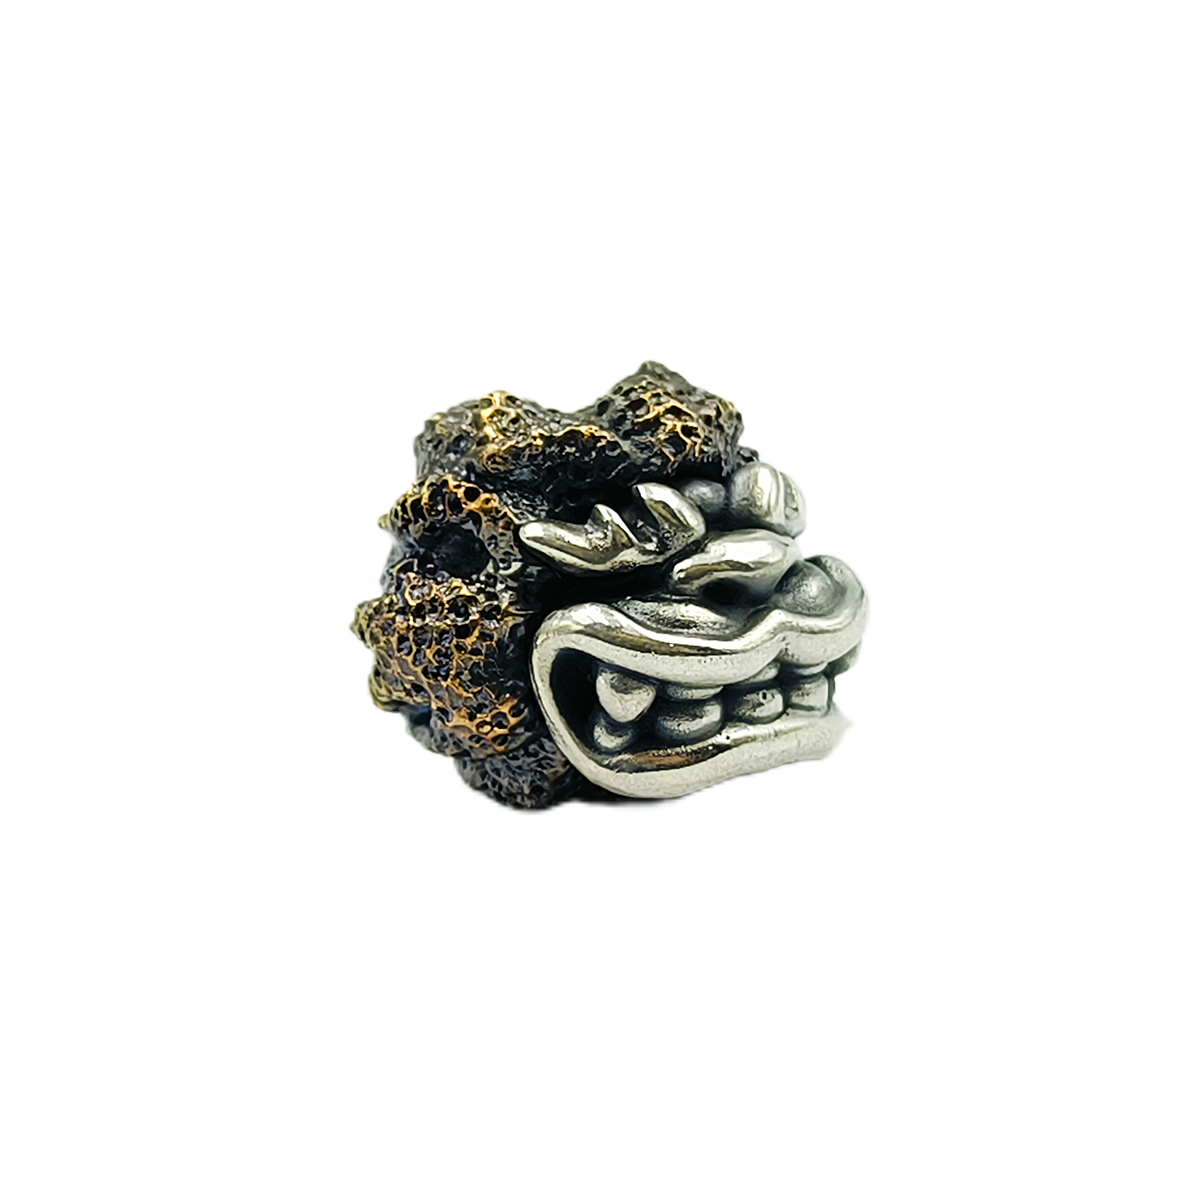 Phase Objects Bronze Lion Beads Custom Made GearBLog Exclusive Limit